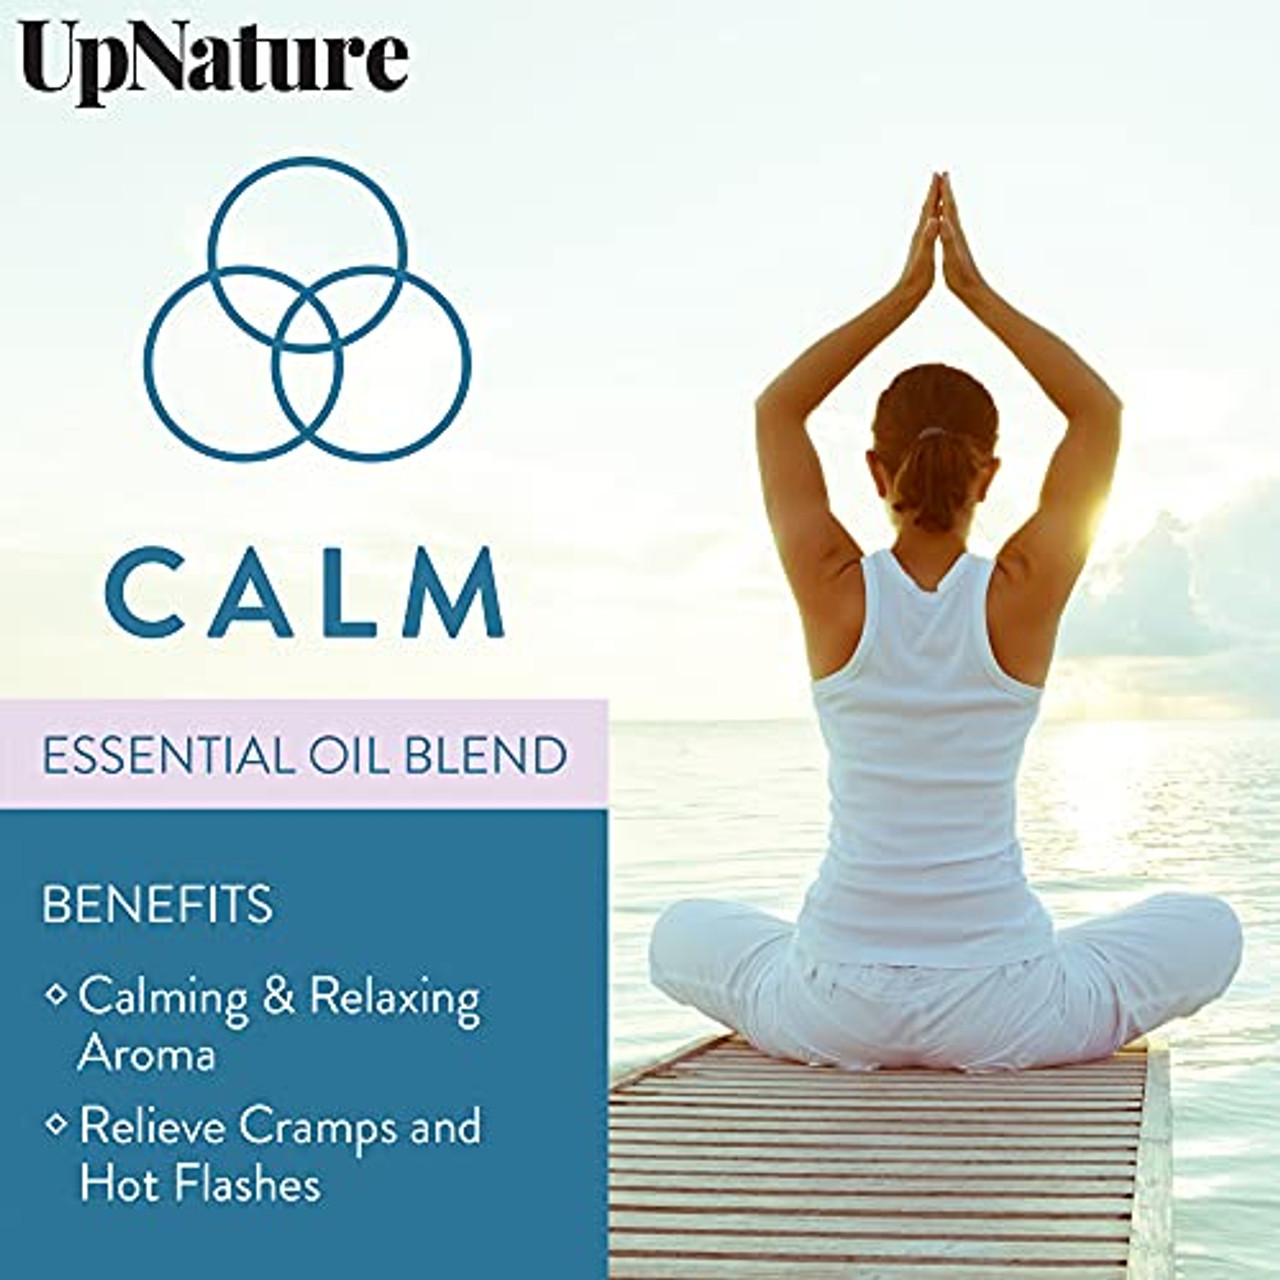 Calm Essential Oil Blend 2 oz - Stress Relief Relaxation Gifts for